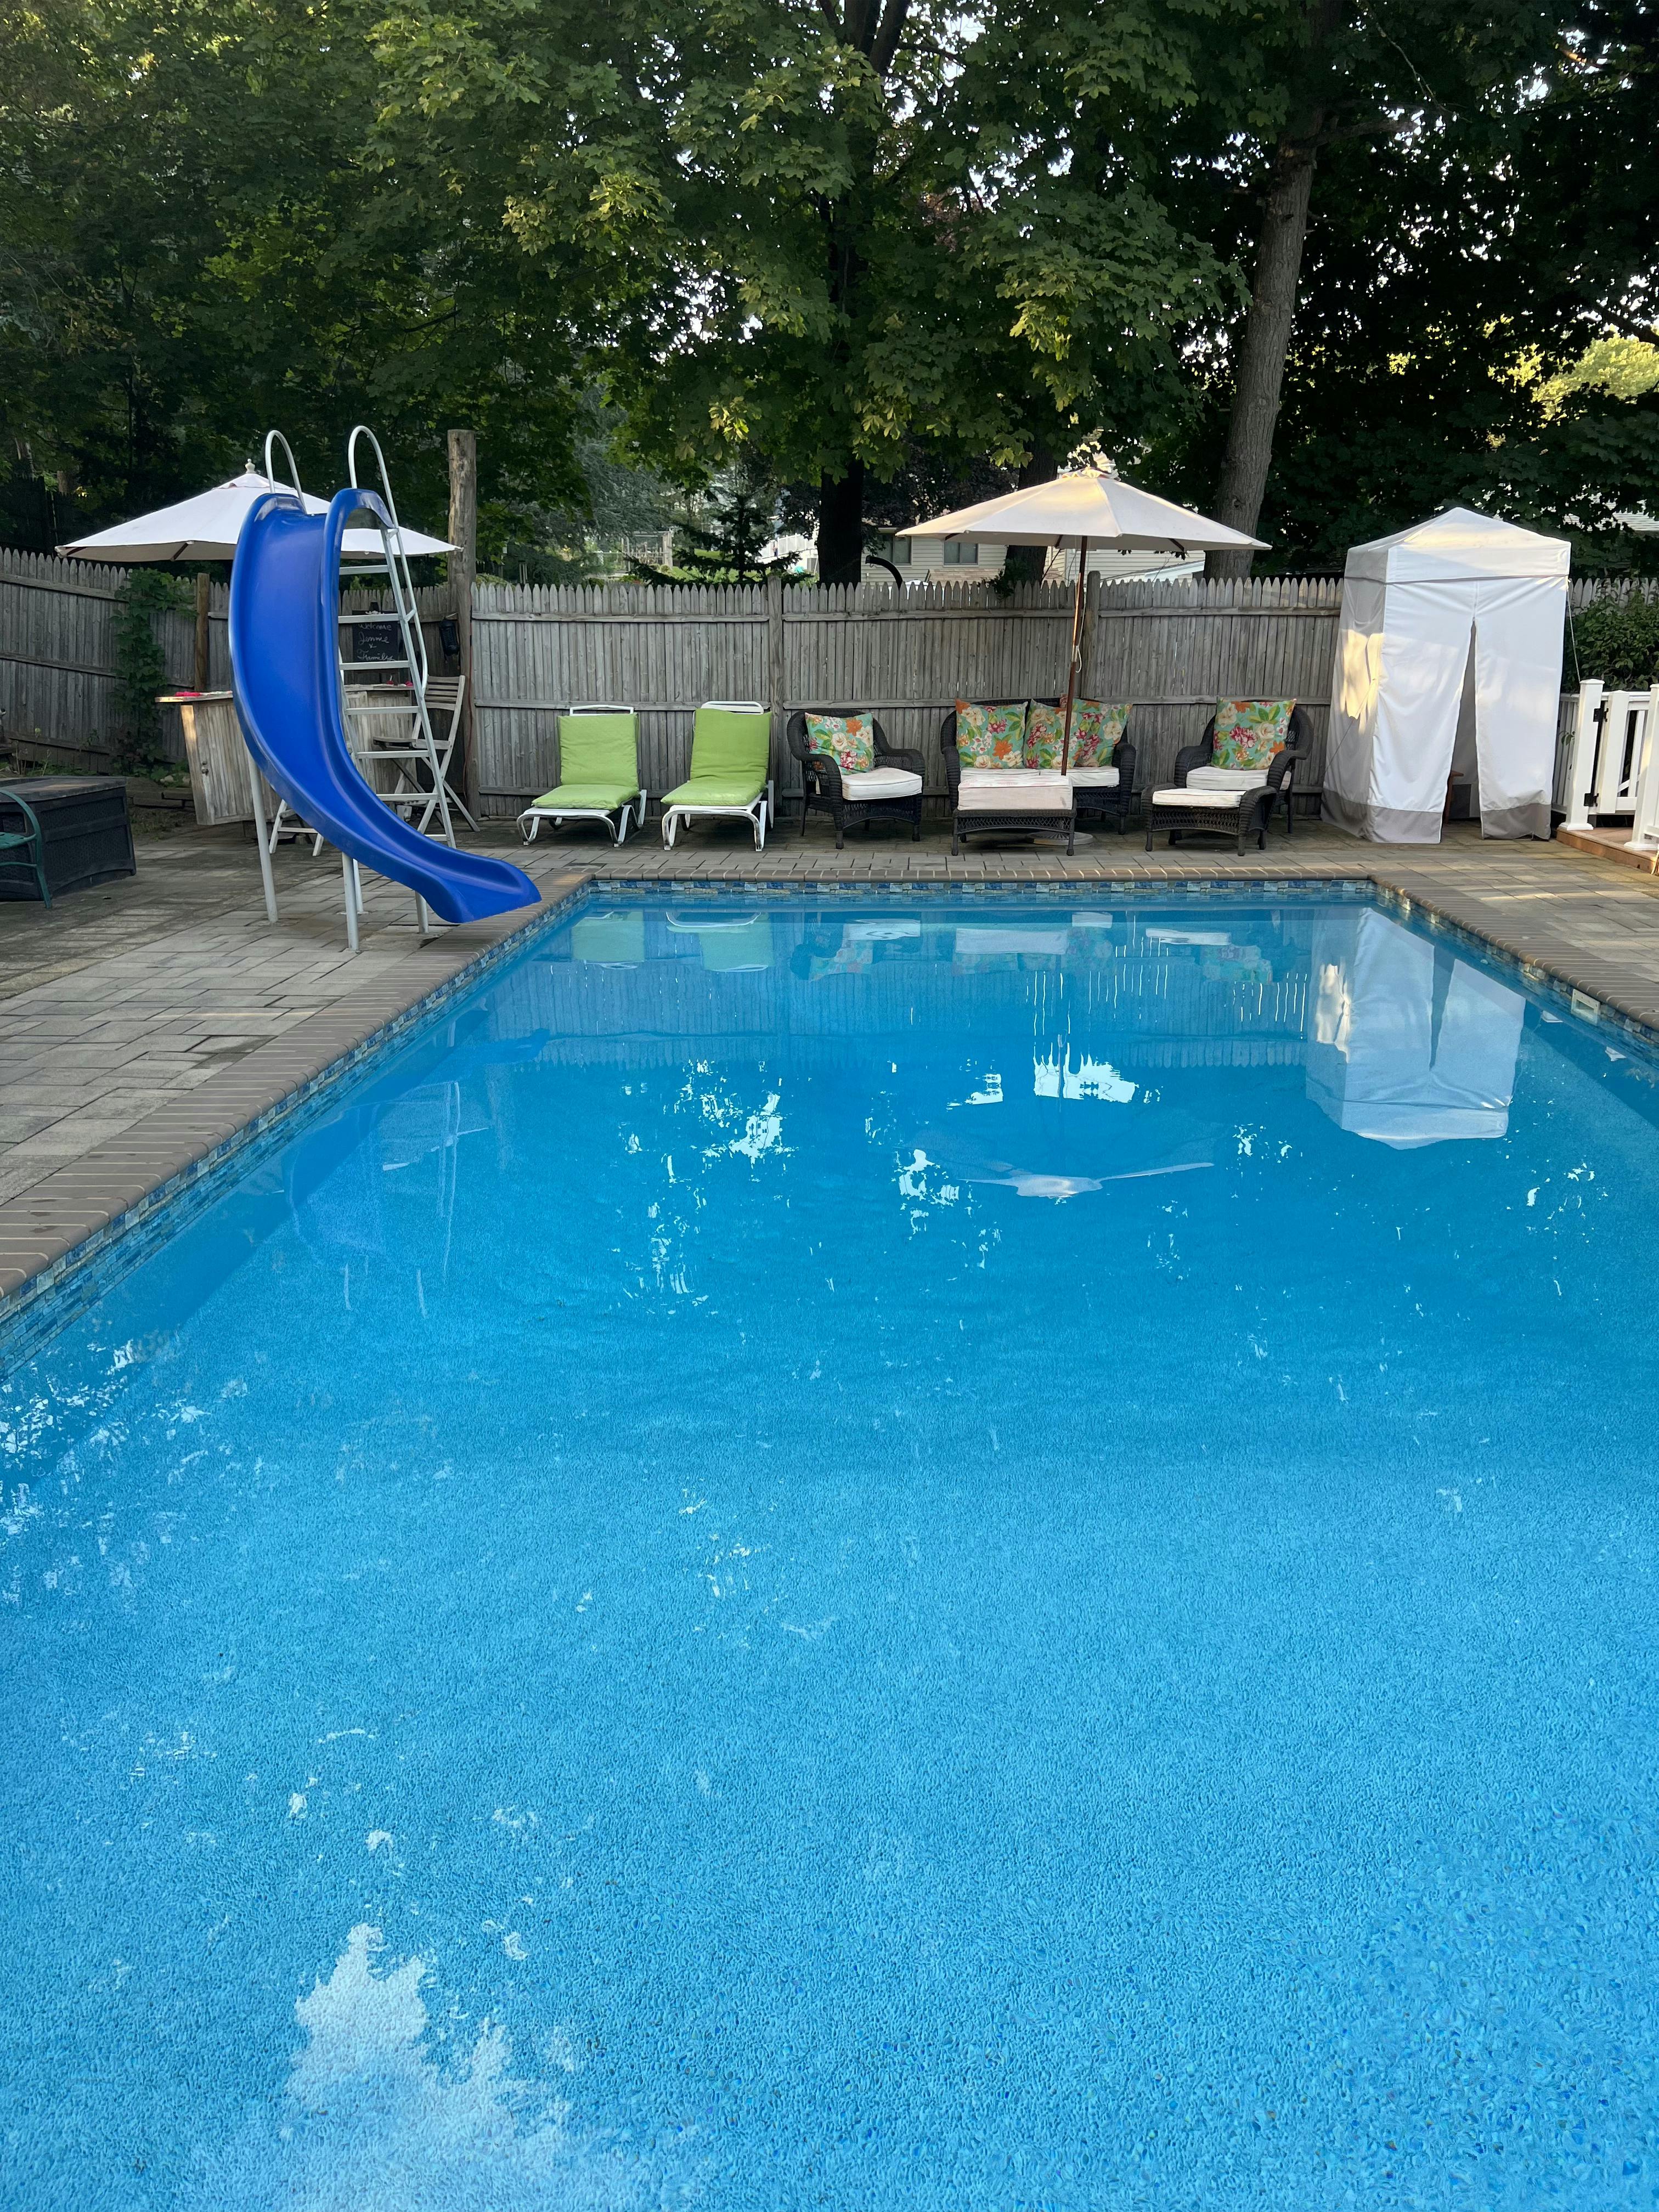 Swimply - Rent Private Pools, Courts, and More by the Hour - Pools